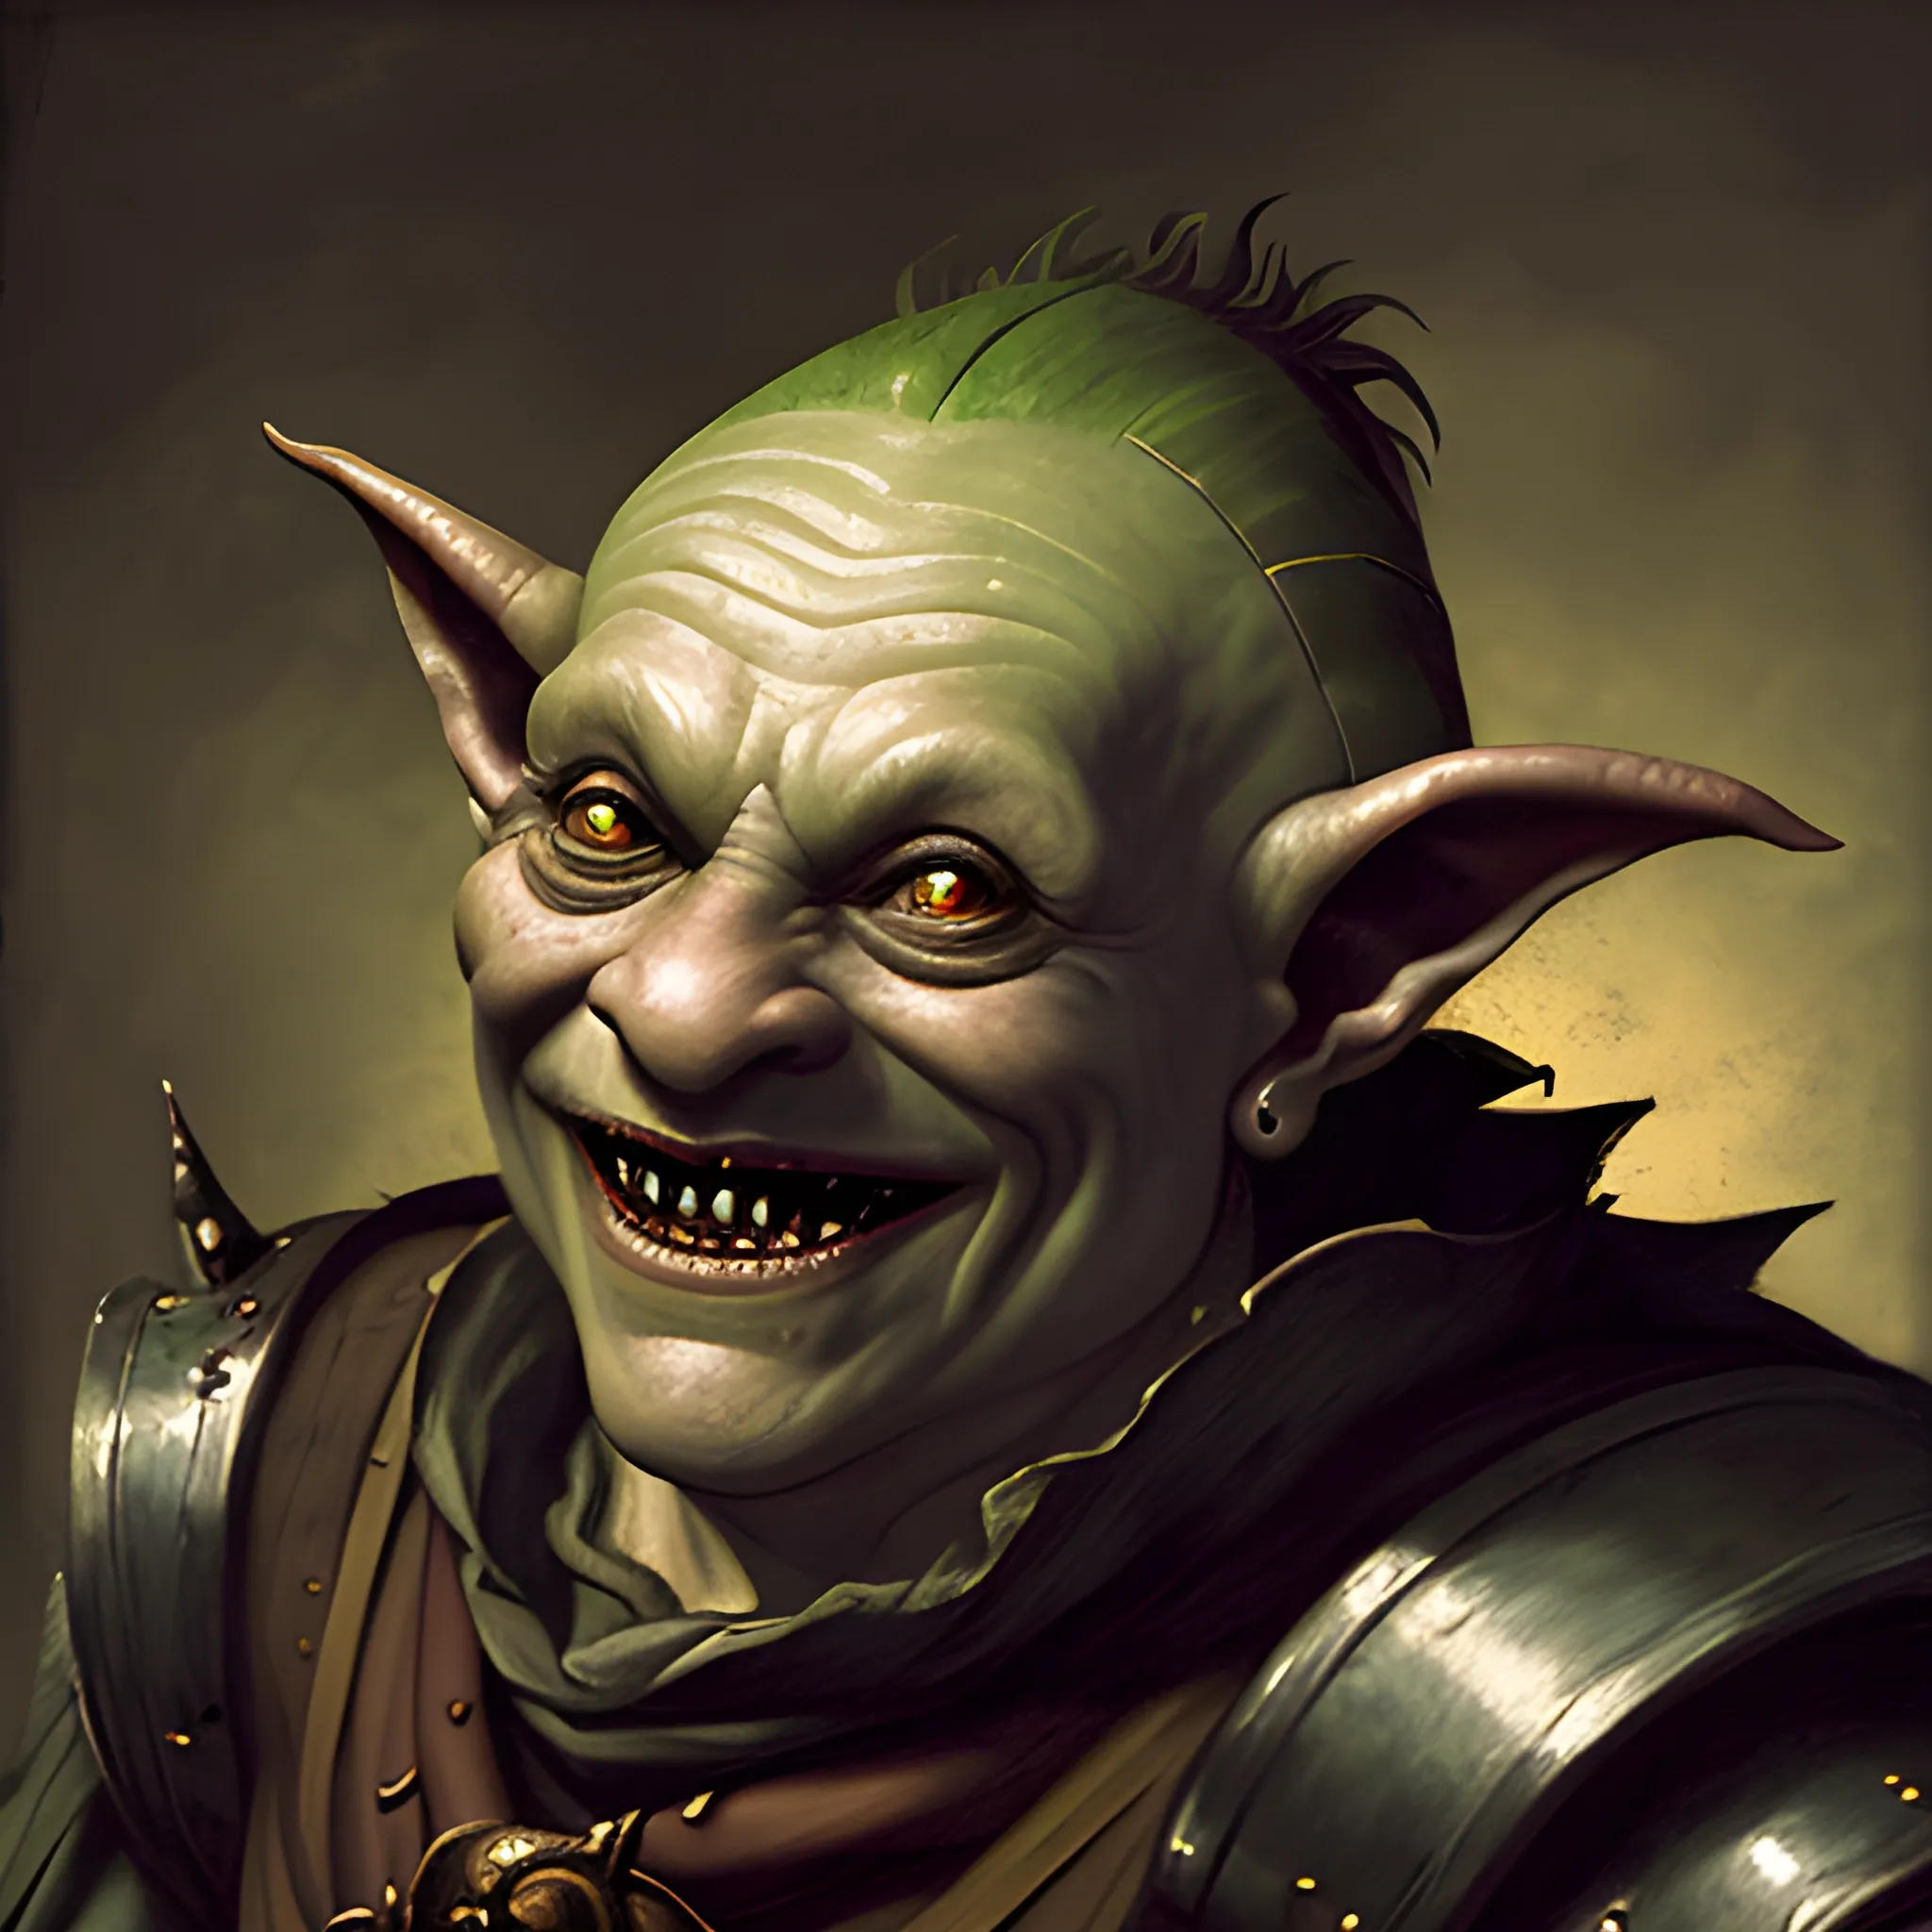 Renaissance portrait of a smiling old armored goblin pirate, dnd, in a dark room, painterly, textured, medieval, fantasy, In the style of Caravaggio, fish features, scared